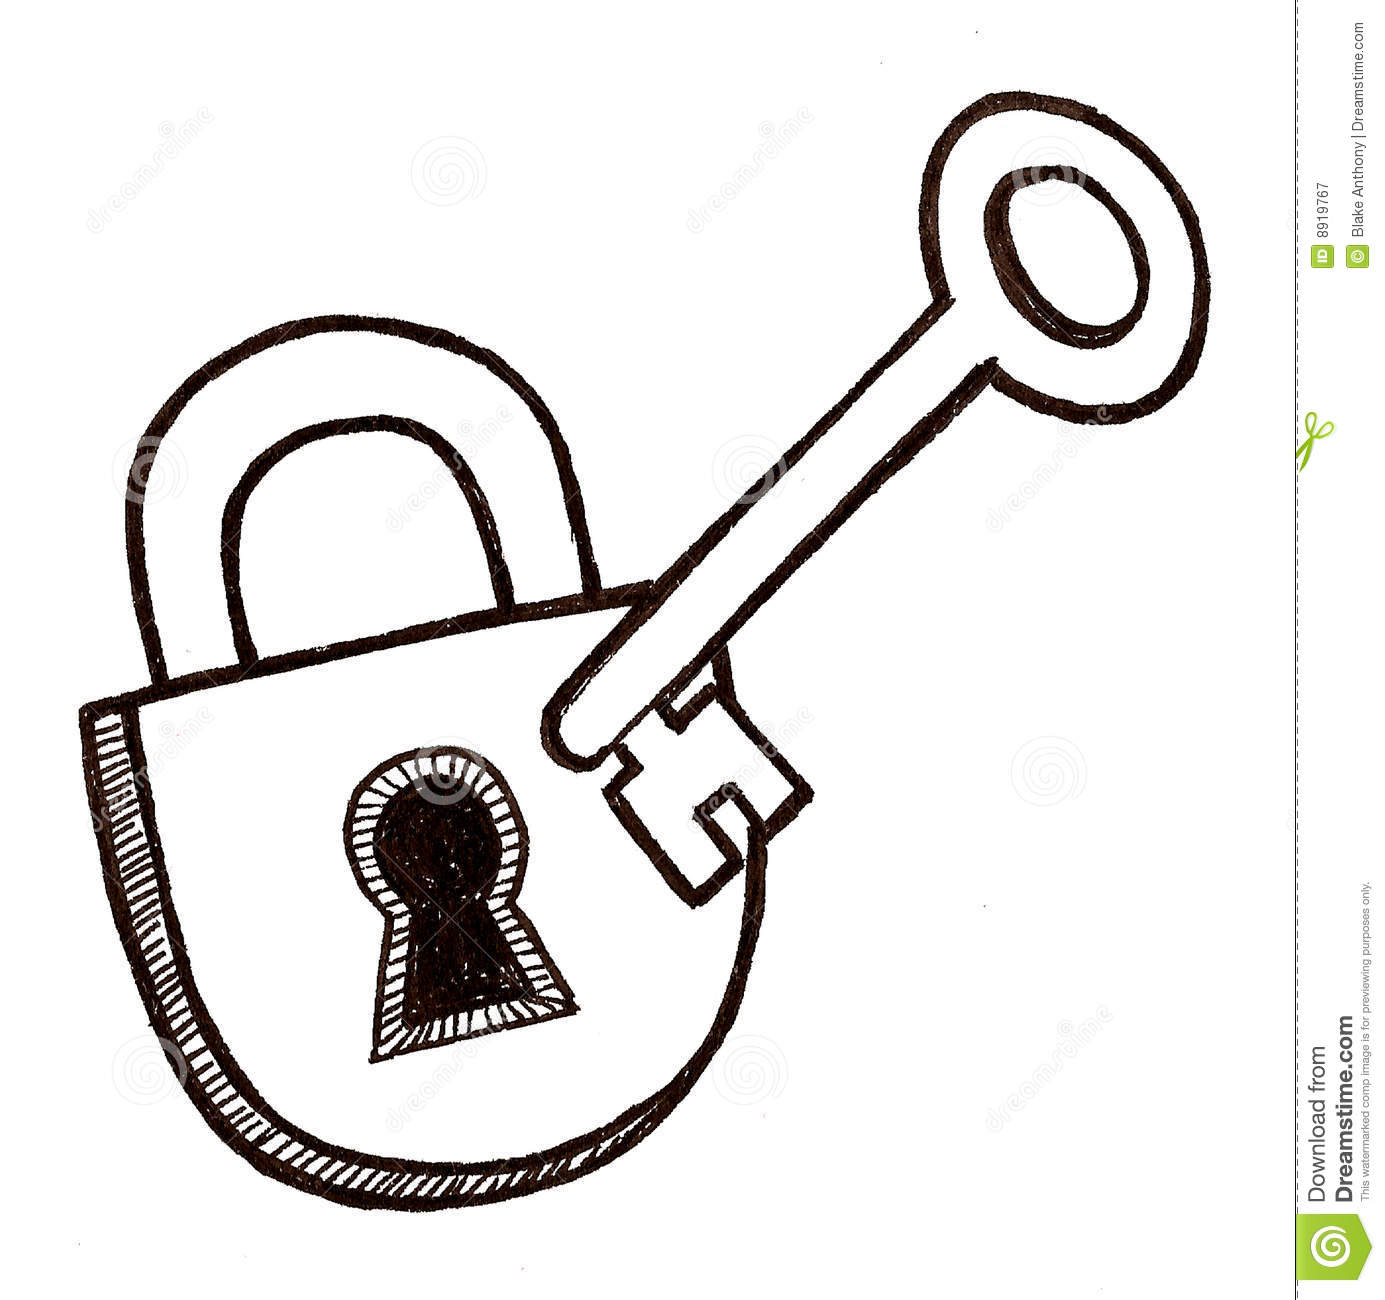 Black And White Illustration Of A Lock And Key